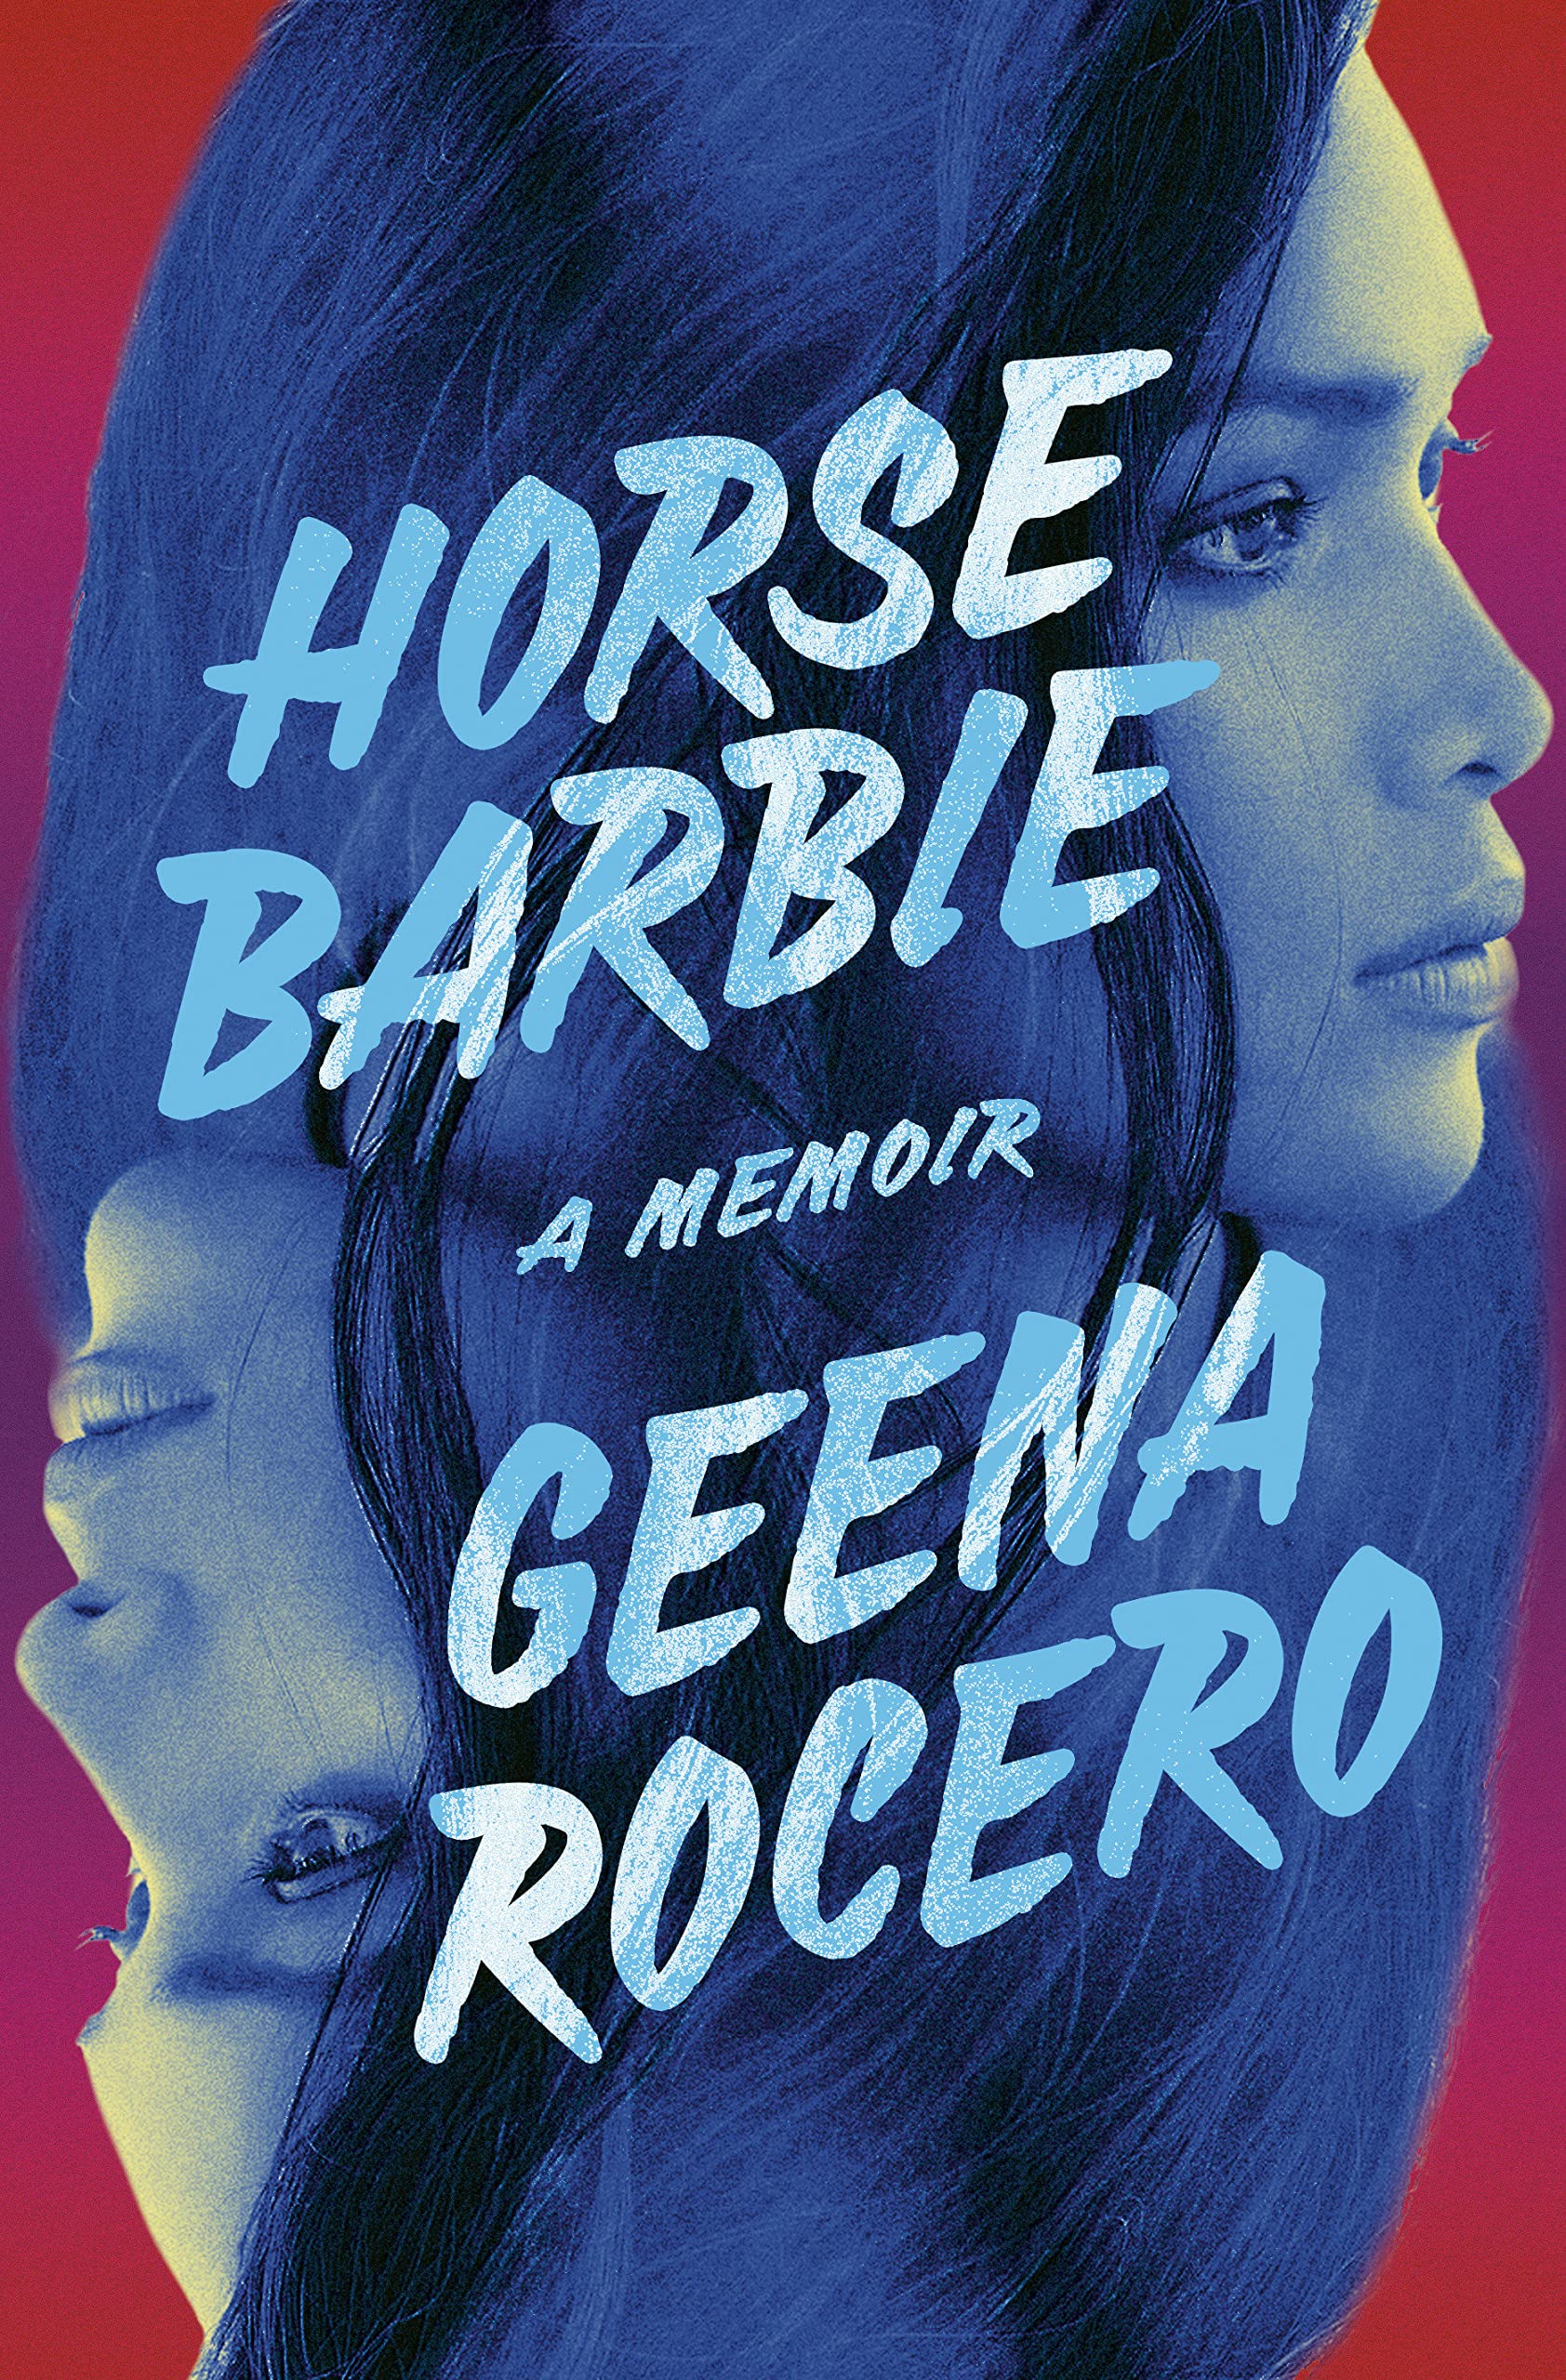 a graphic of the cover of Horse Barbie: A Memoir by Geena Rocero